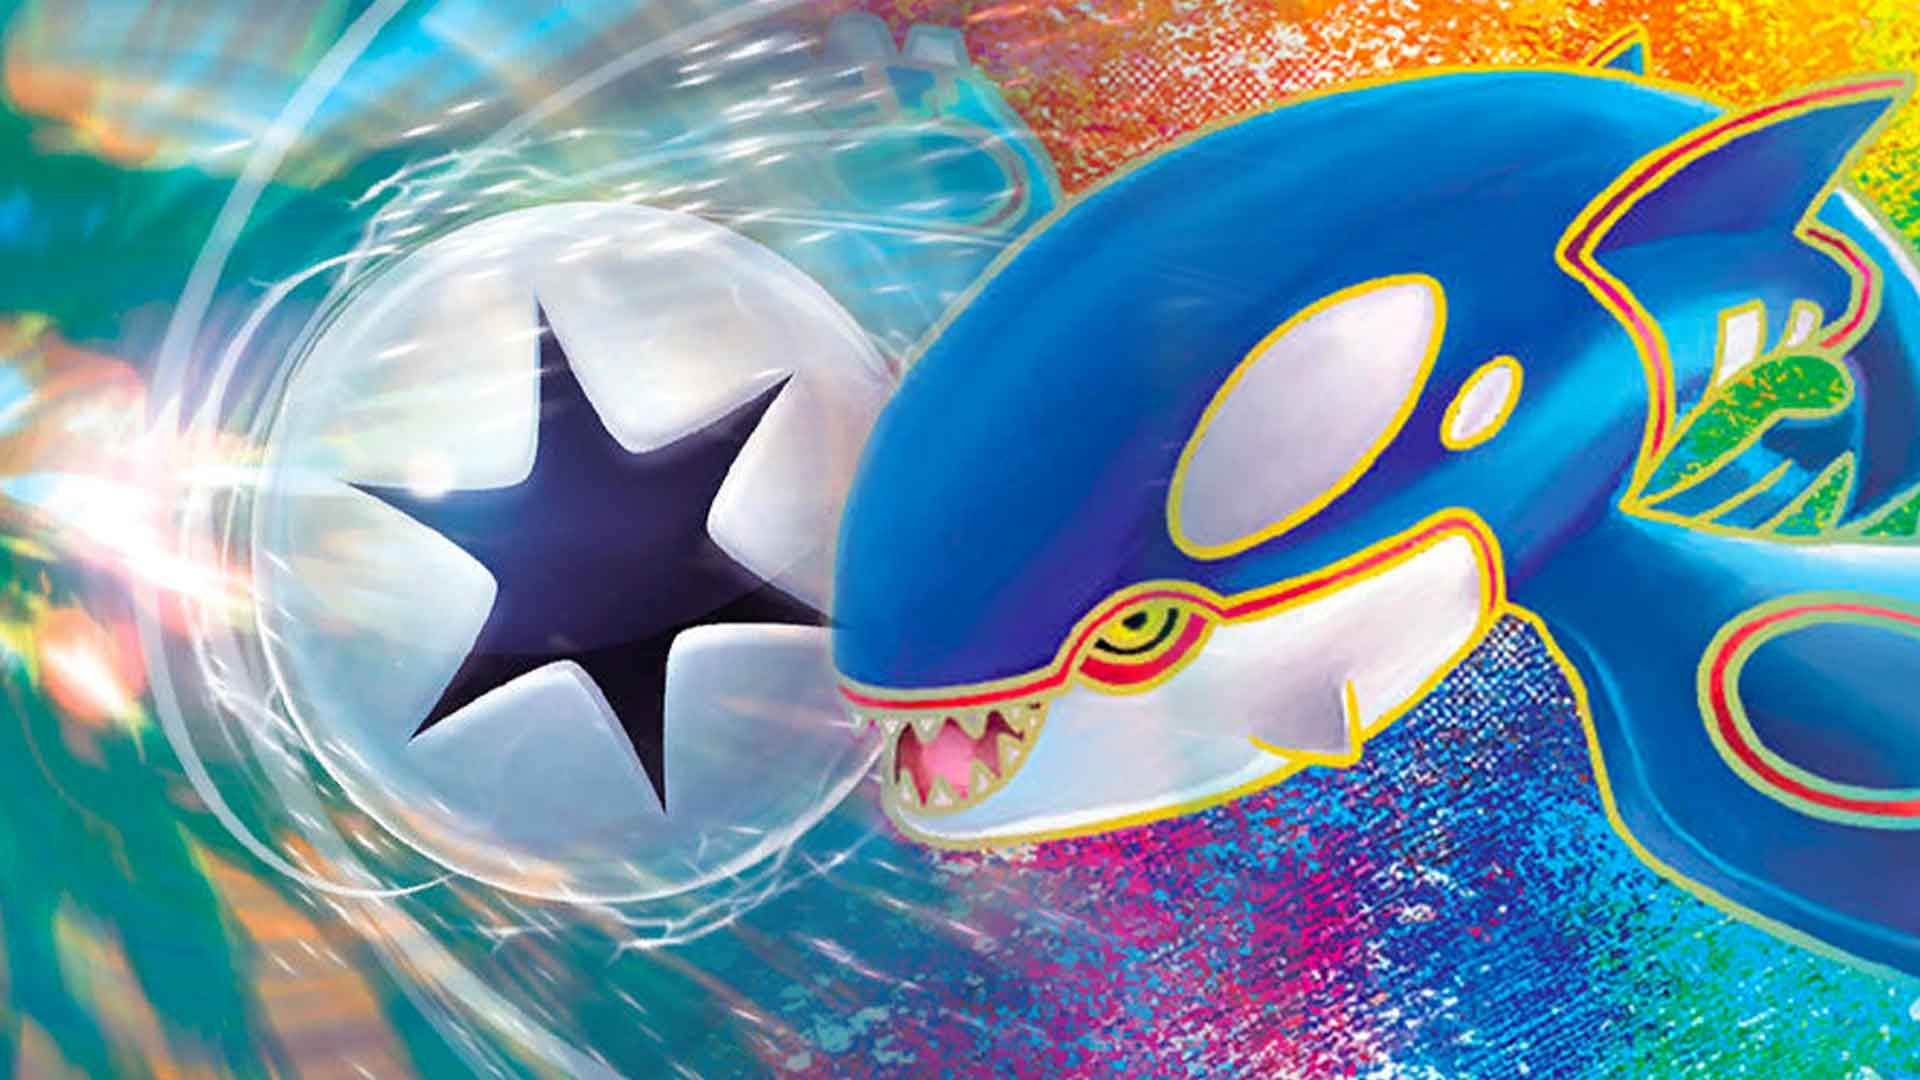 Pokémon TCG: Shining Fates Expansion—Release Date February 19, 2021